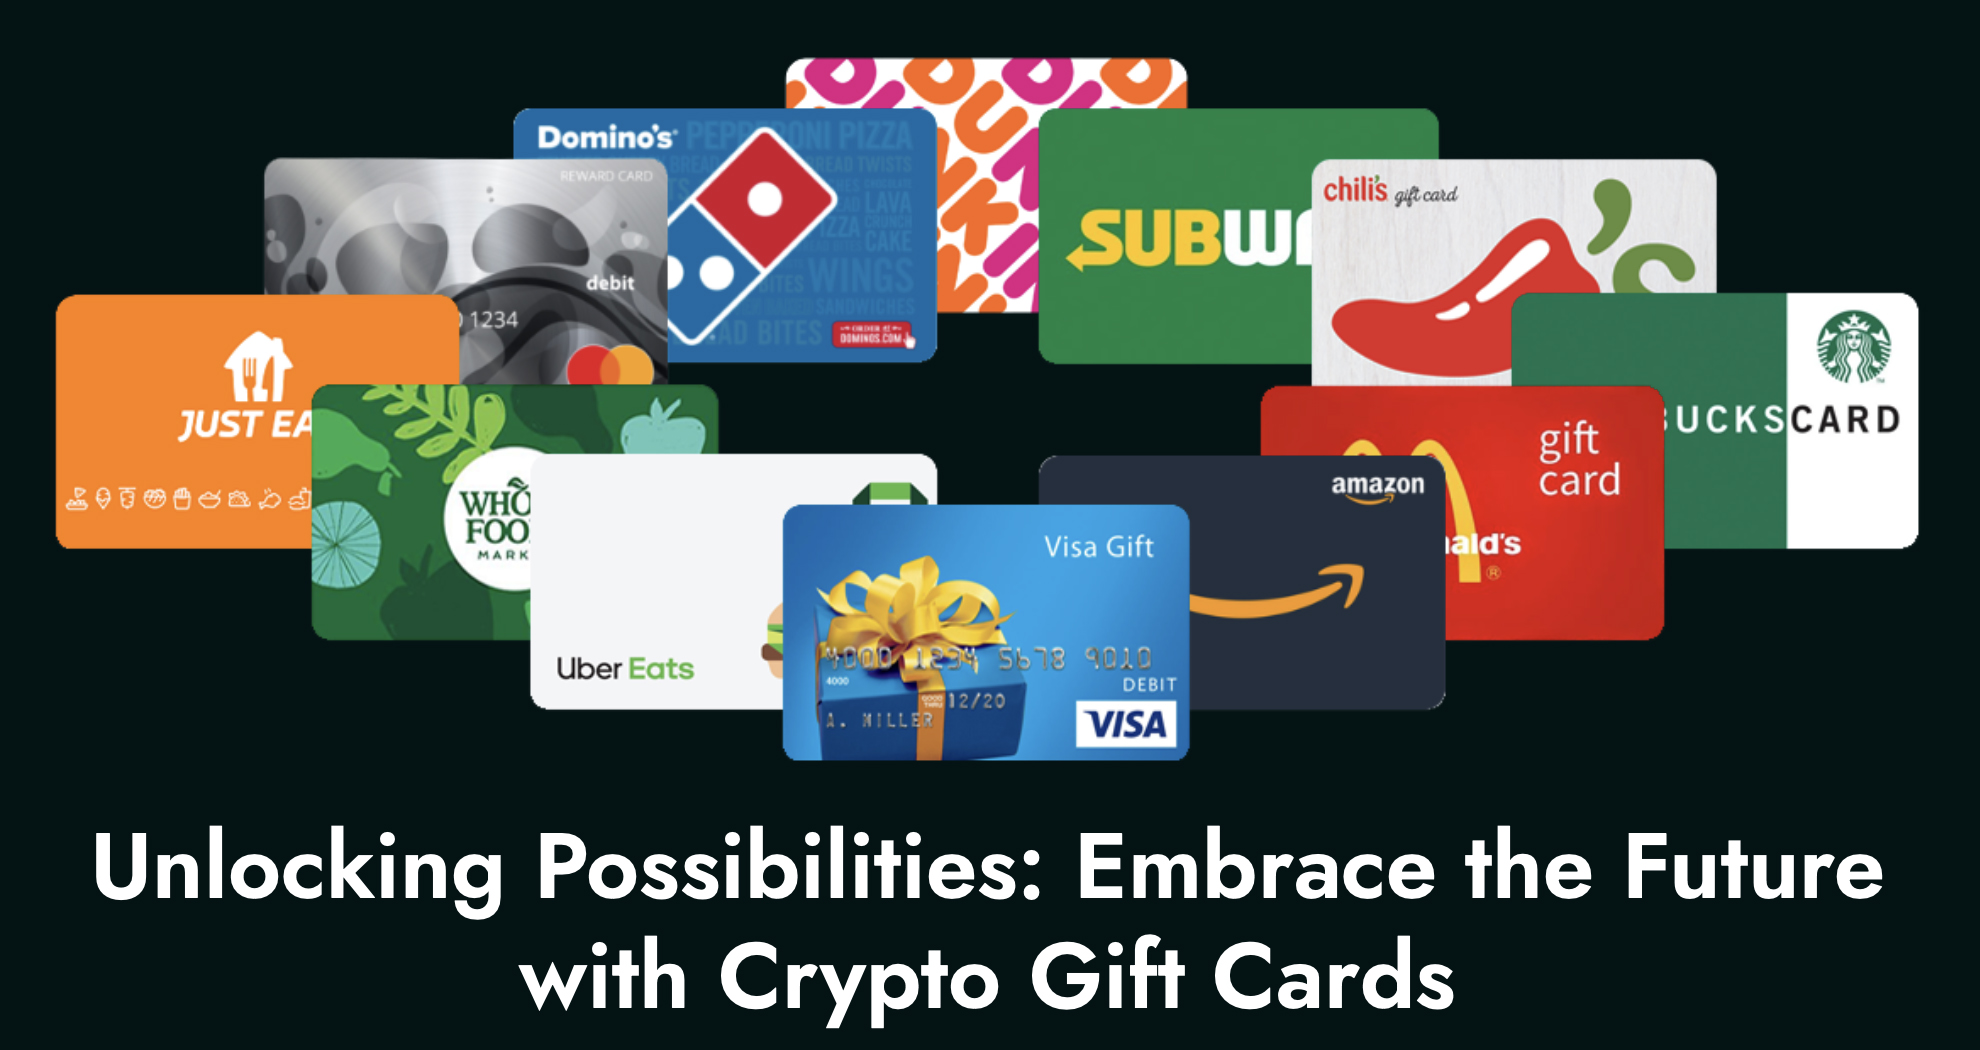 Through Live on Crypto, users can purchase gift cards for various services using crypto. Source: Live on Crypto